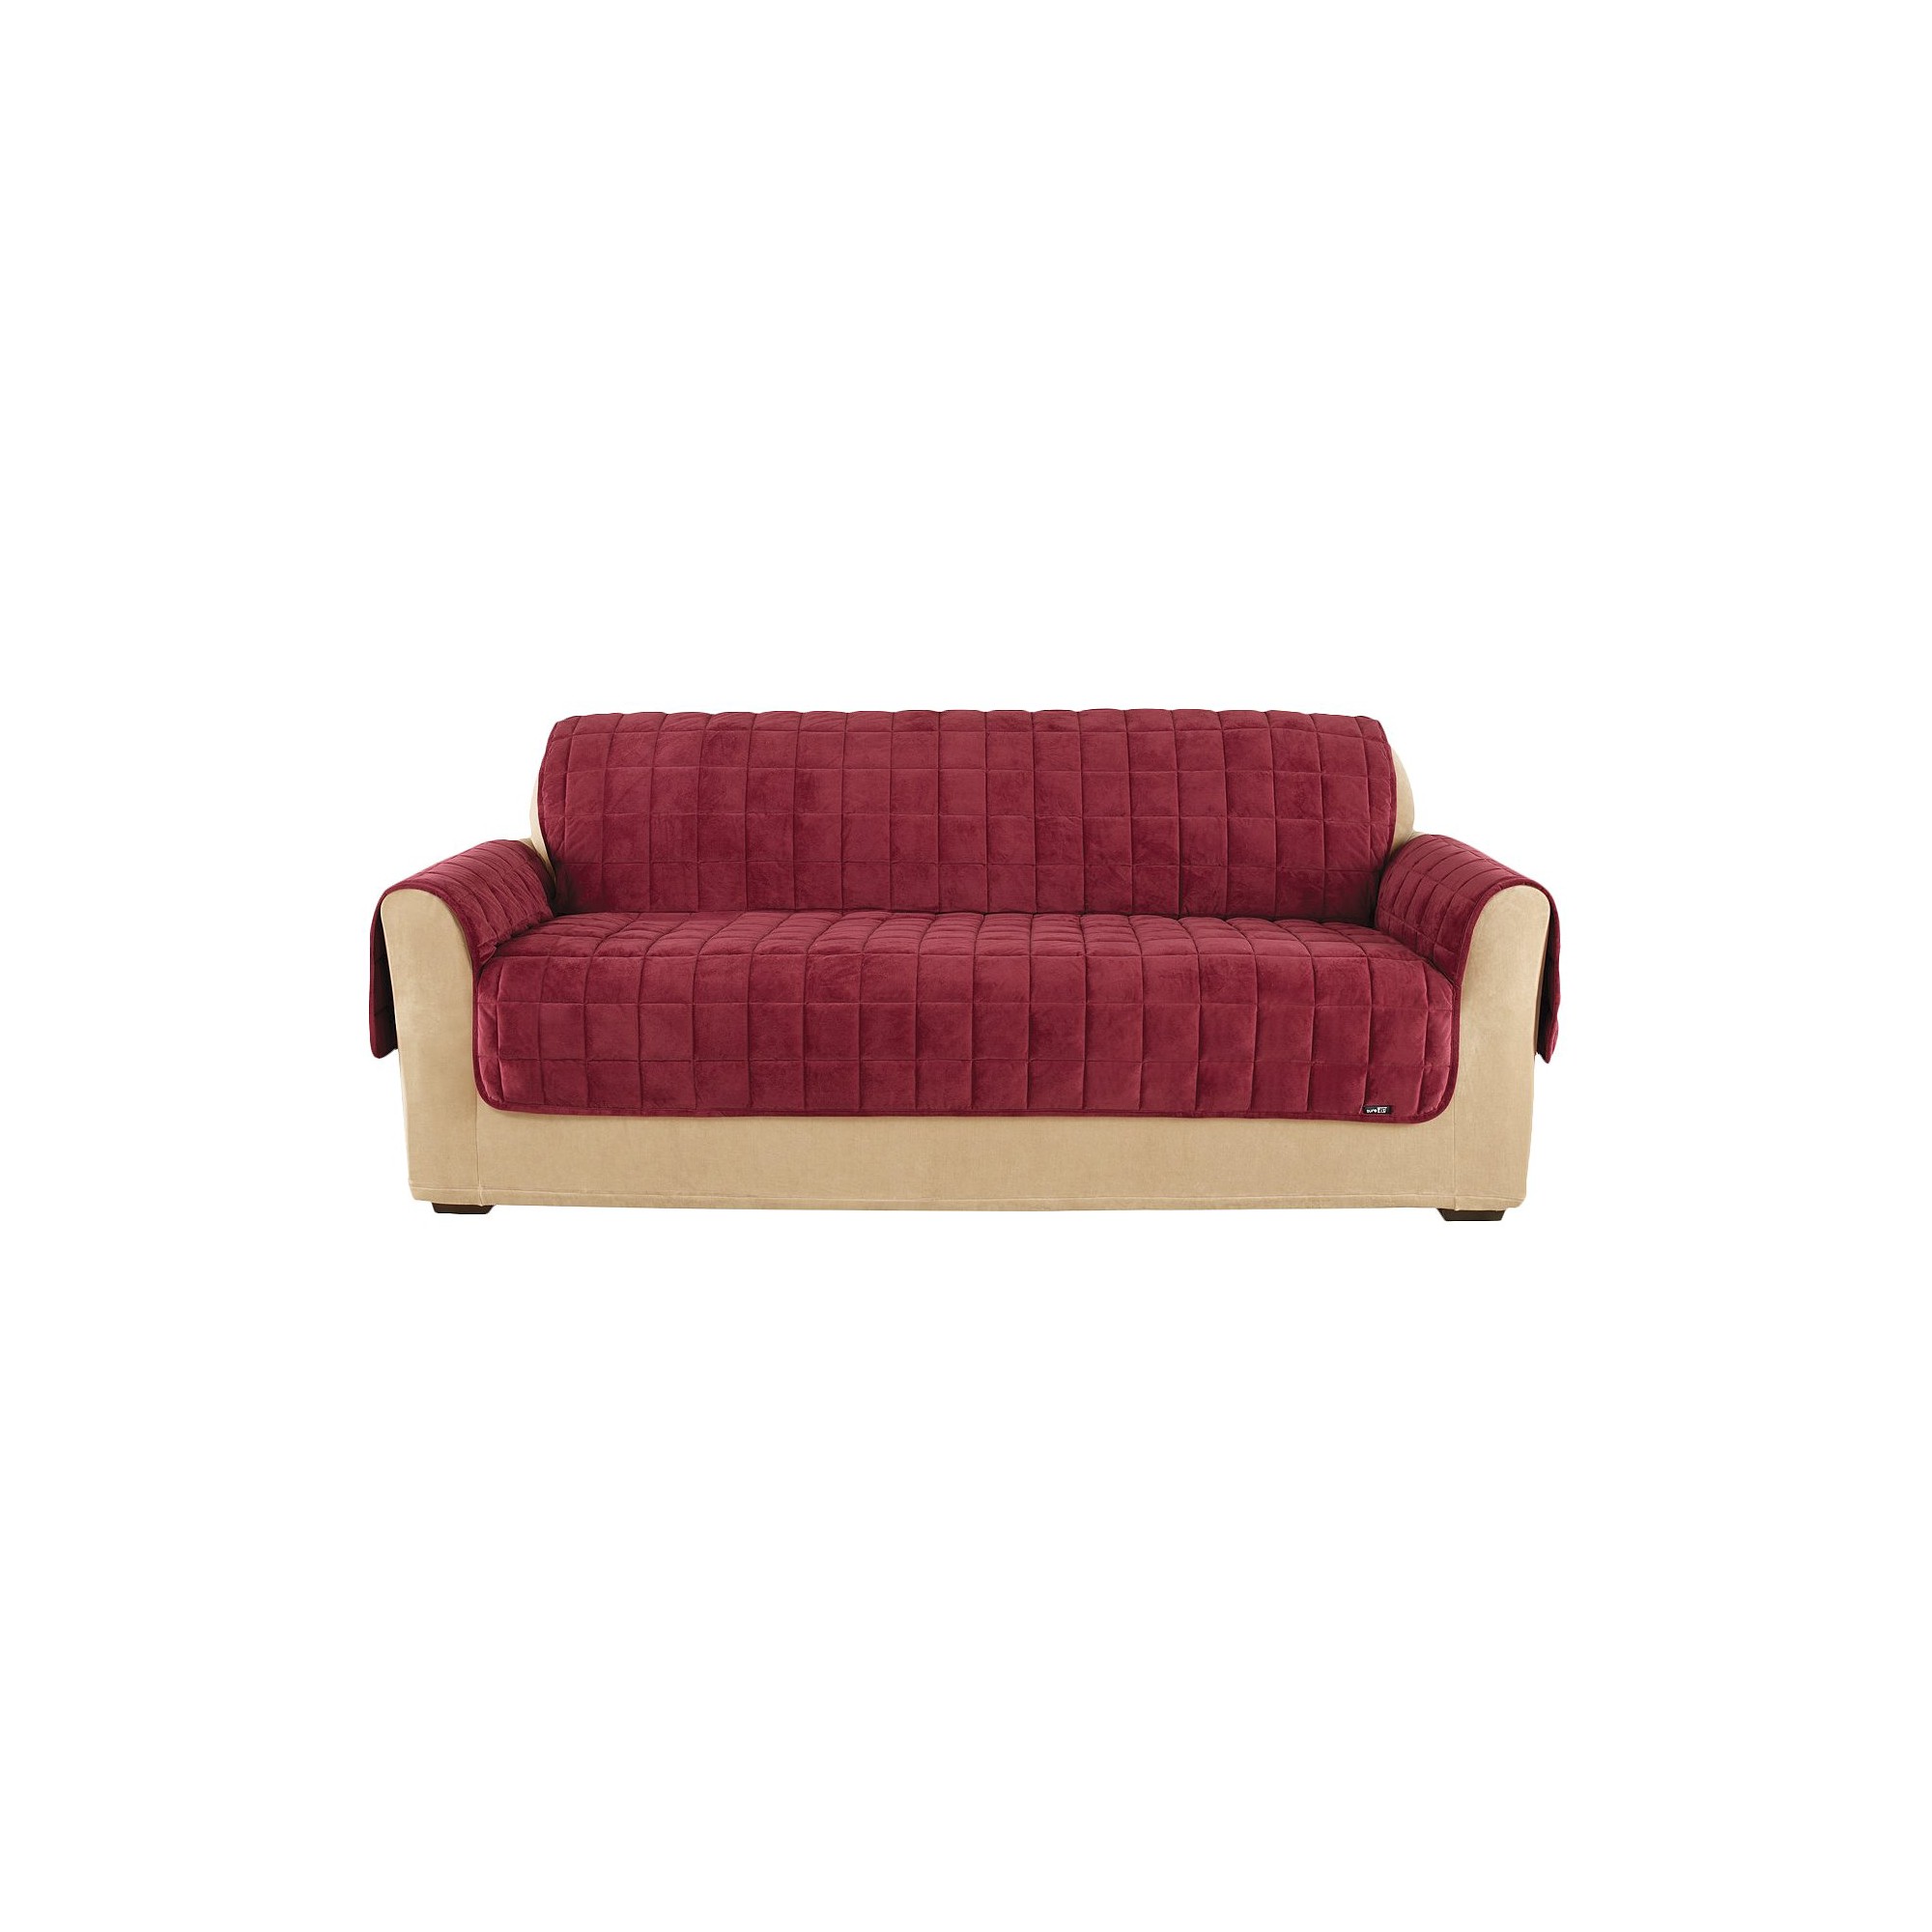 Furniture Friend Deluxe Comfort Quilted Sofa Furniture Protector Burgundy - Sure Fit, Red